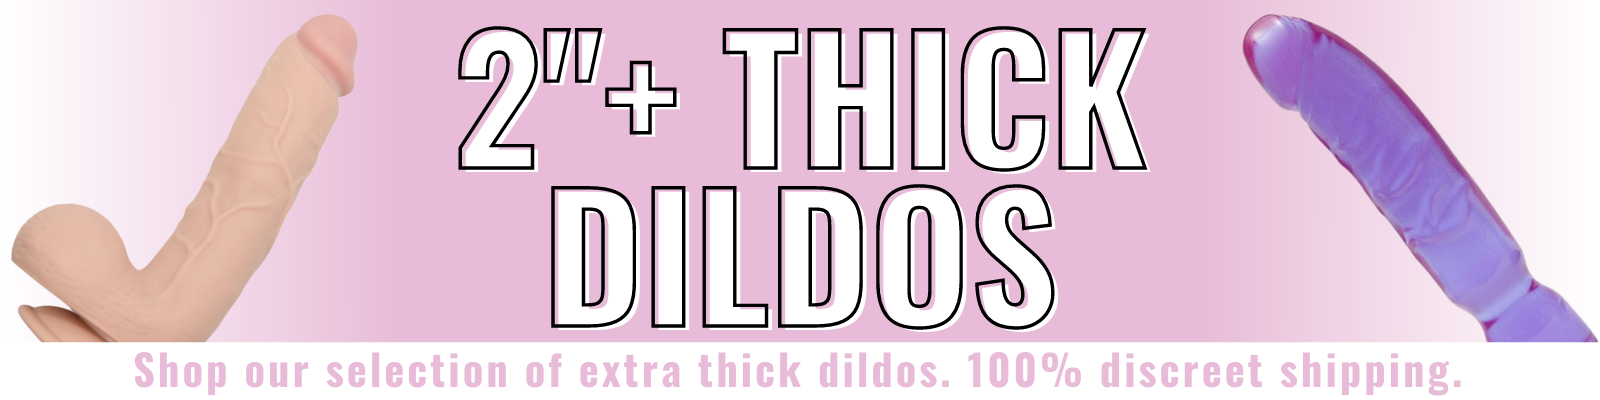 Banner for our 2 inch plus thick dildo collection. Banner reads: 2 inch plus thick dildos. Shop our selection of extra thick dildos. 100% discreet shipping.